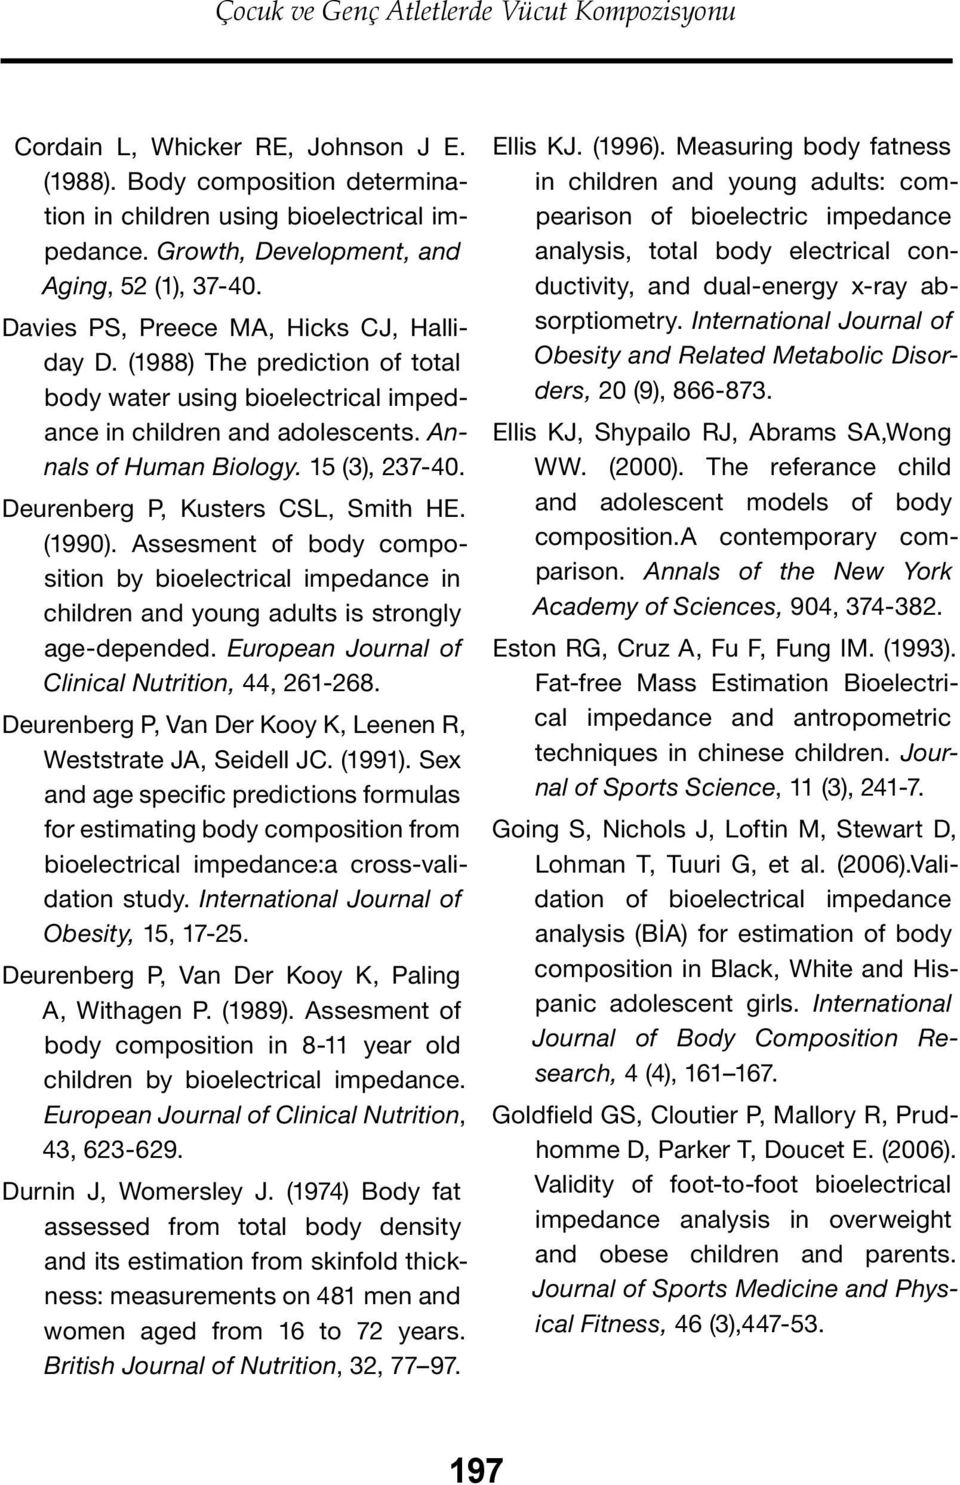 Annals of Human Biology. 15 (3), 237-40. Deurenberg P, Kusters CSL, Smith HE. (1990). Assesment of body composition by bioelectrical impedance in children and young adults is strongly age-depended.